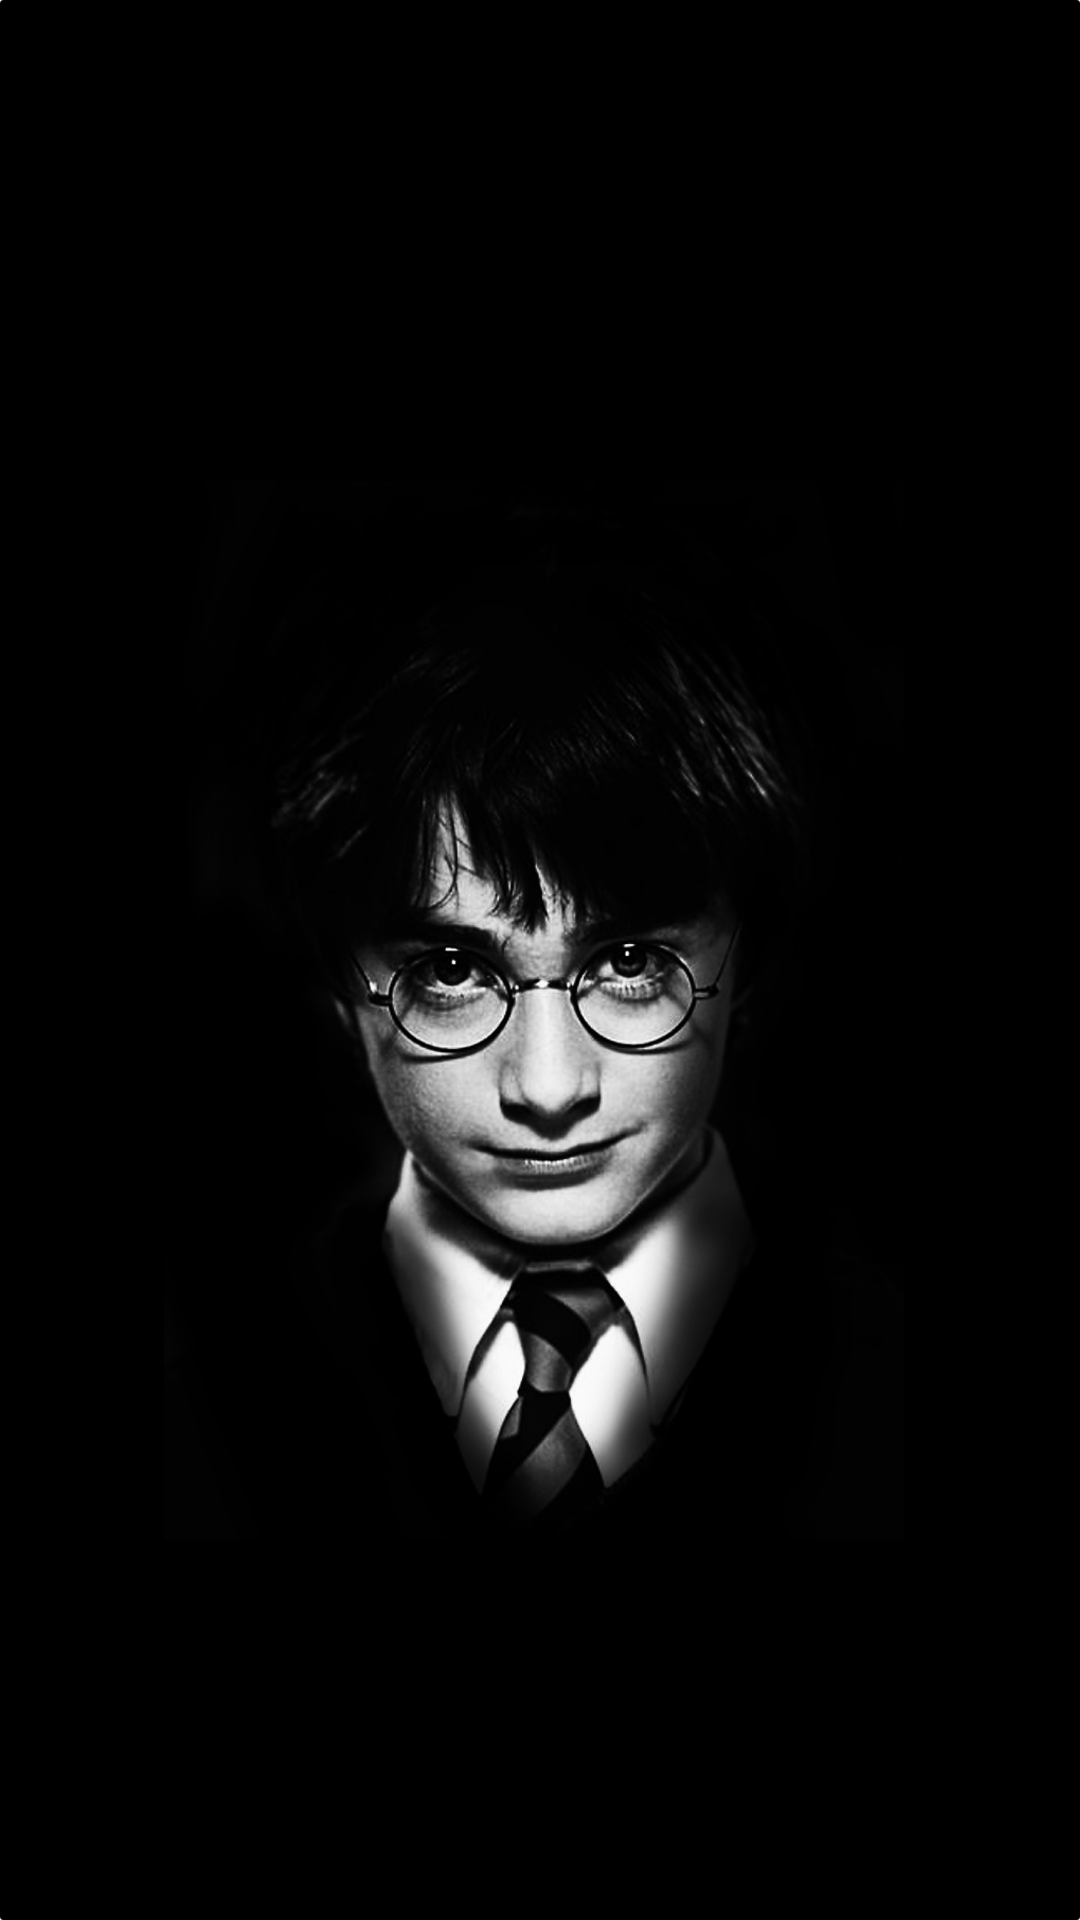 Harry Potter Black and White Wallpapers on WallpaperDog